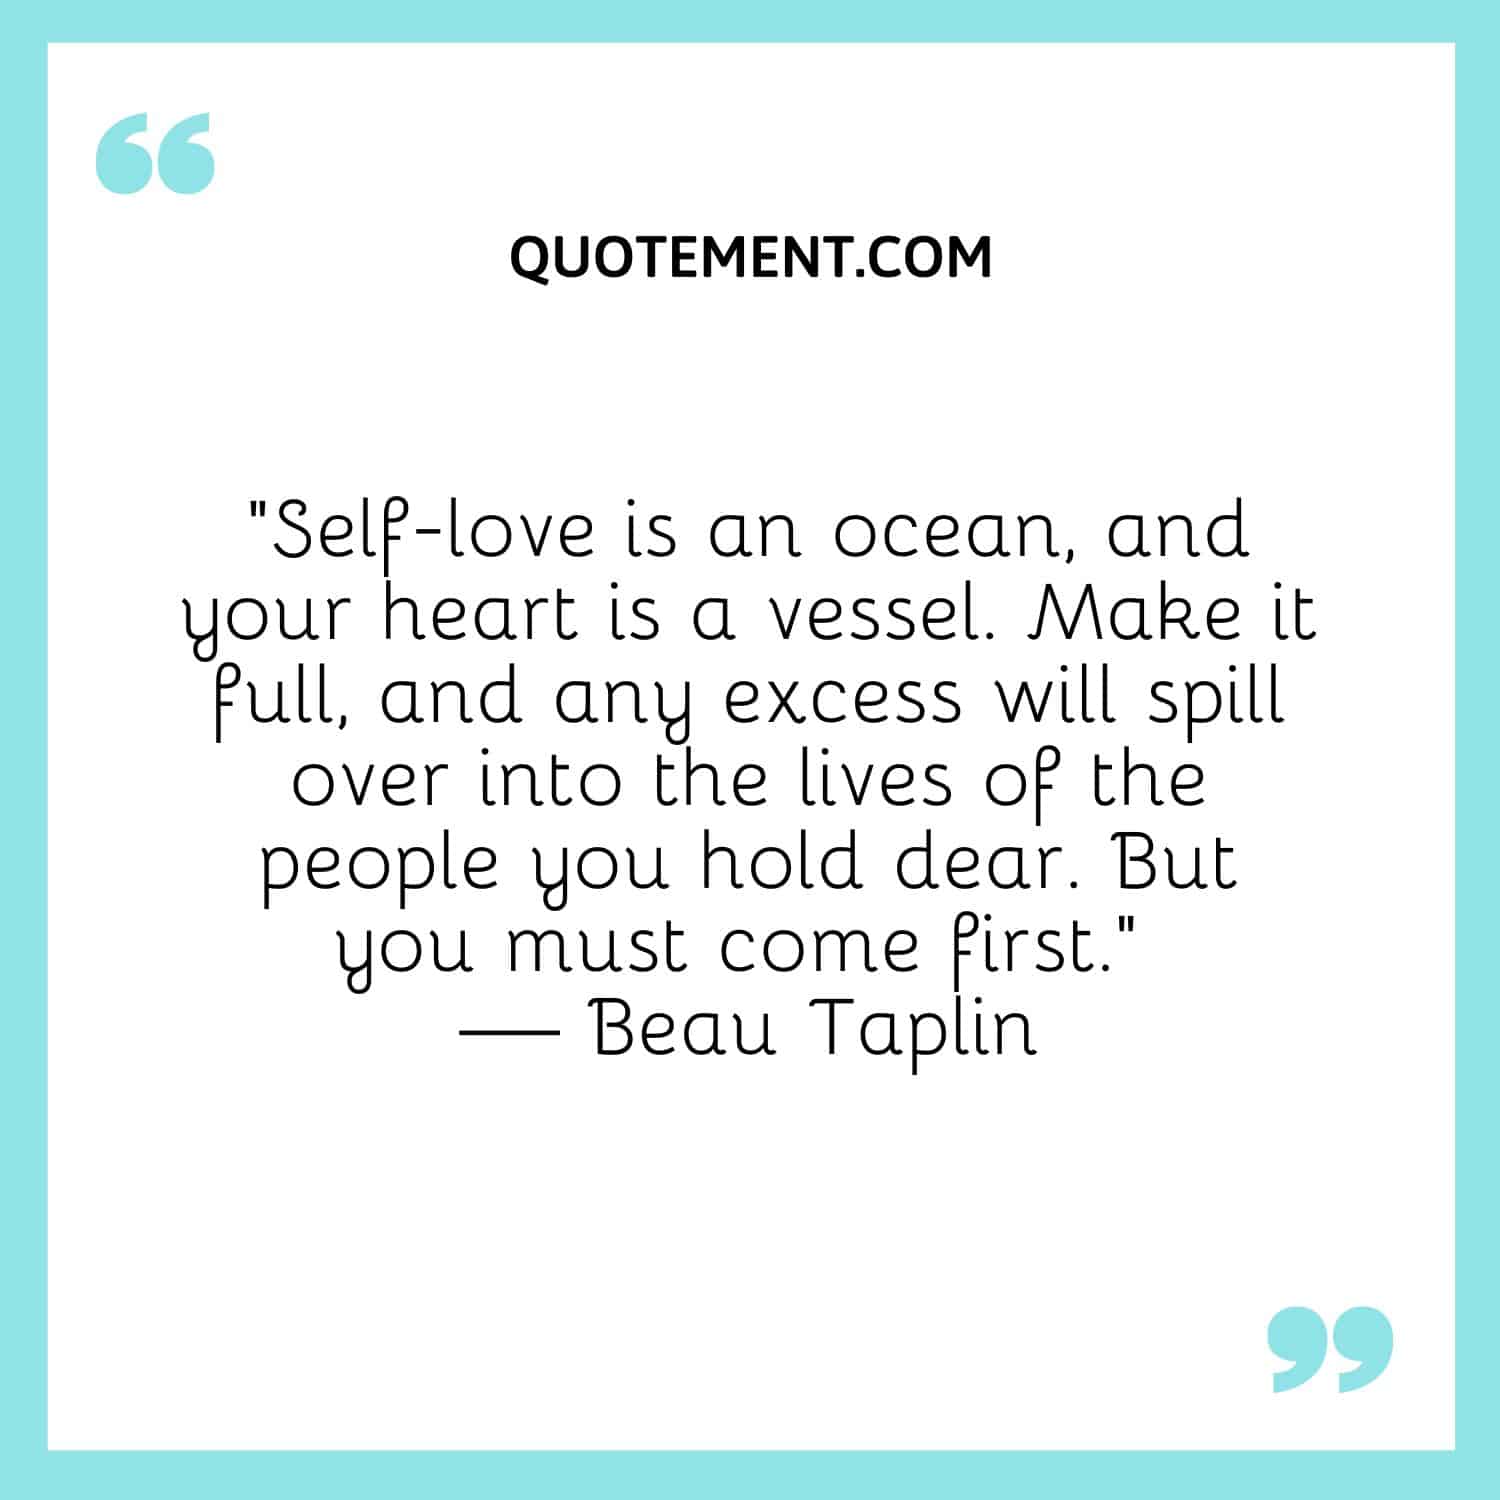 Self-love is an ocean, and your heart is a vessel.